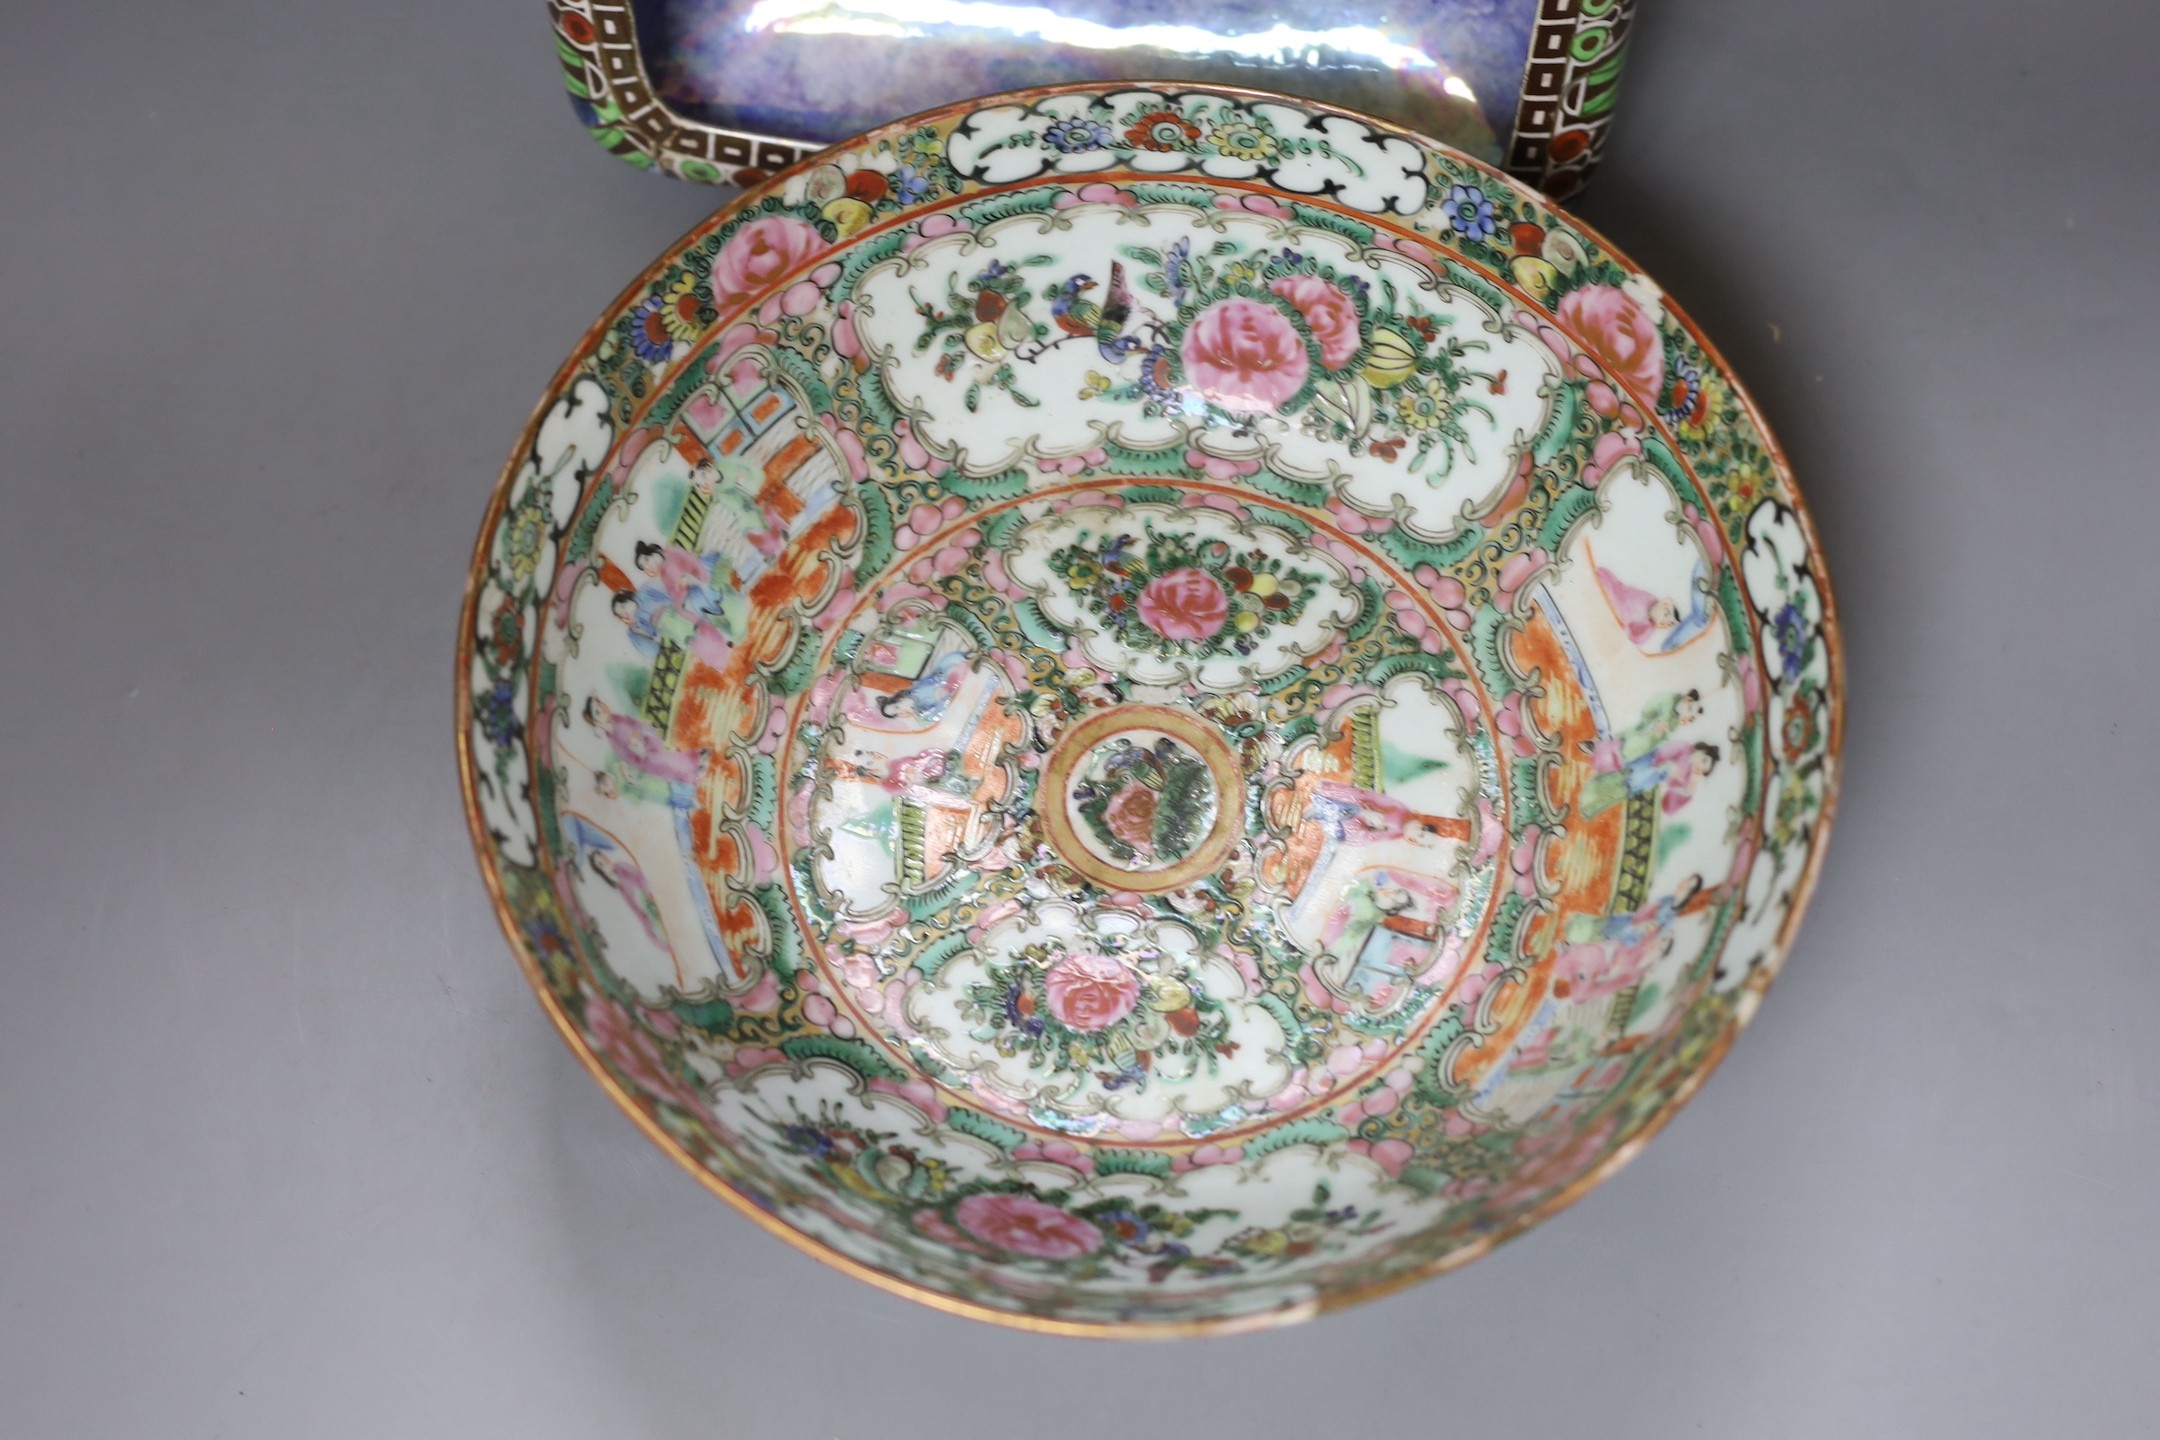 A late 19th century Cantonese famille rose bowl, a Royal Winton lustreware, diameter 26cm, together with a Japanese Satsuma twin handled vase, 20.5cm tall